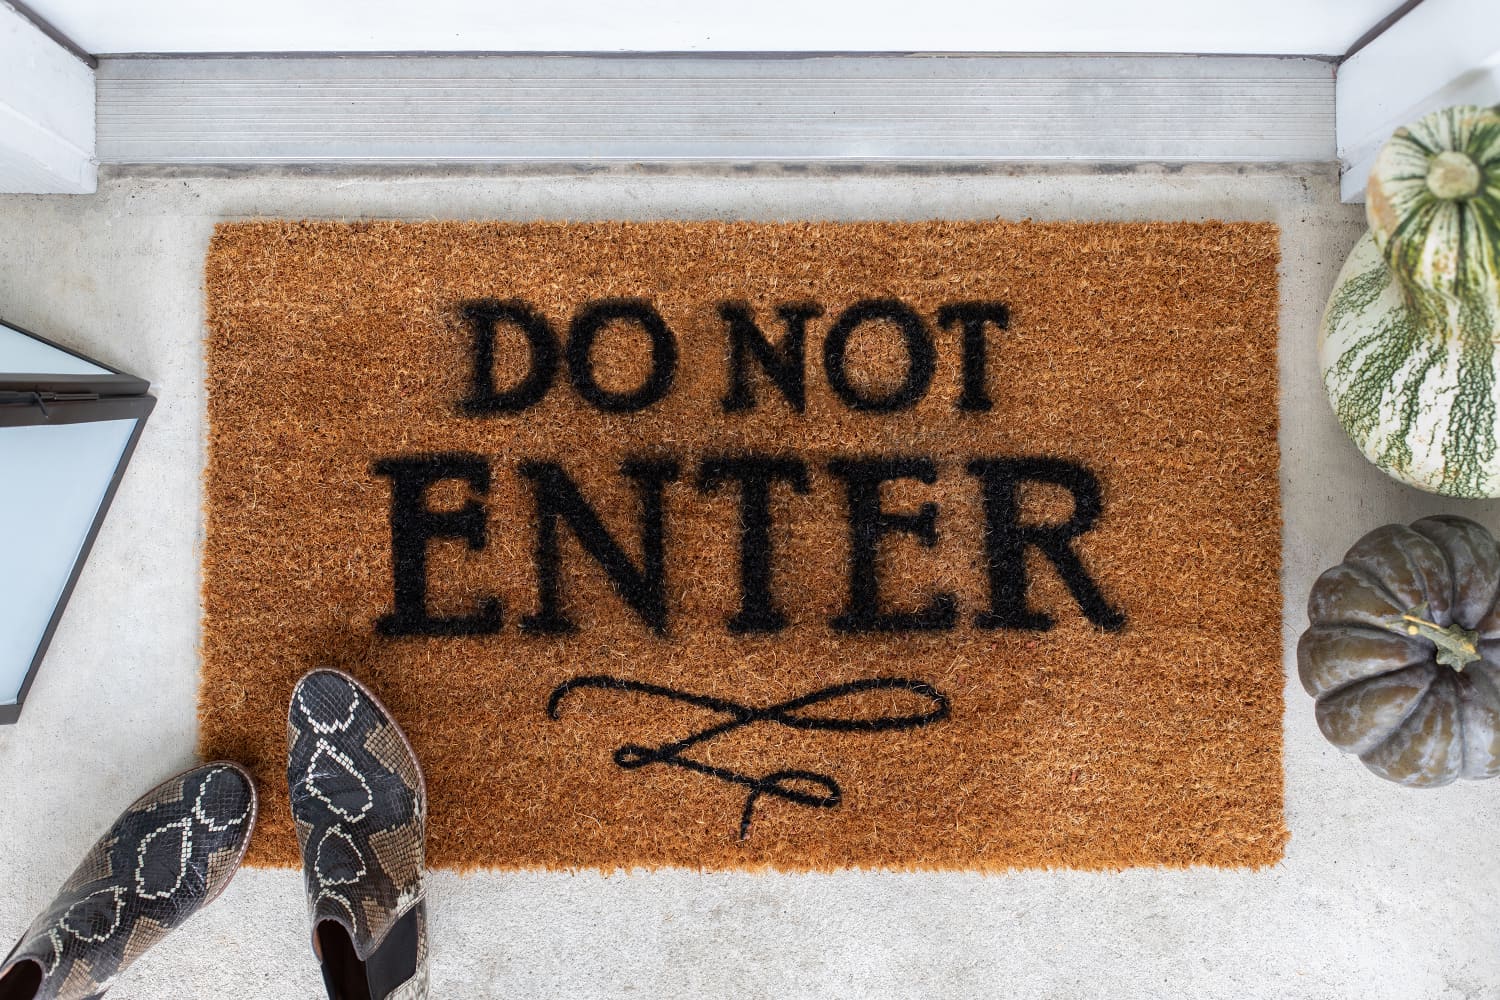 https://cdn.apartmenttherapy.info/image/upload/f_auto,q_auto:eco,c_fill,g_auto,w_1500,ar_3:2/at%2Fhome-projects%2F2020-10%2FHalloween_Doormat_Final_Shot